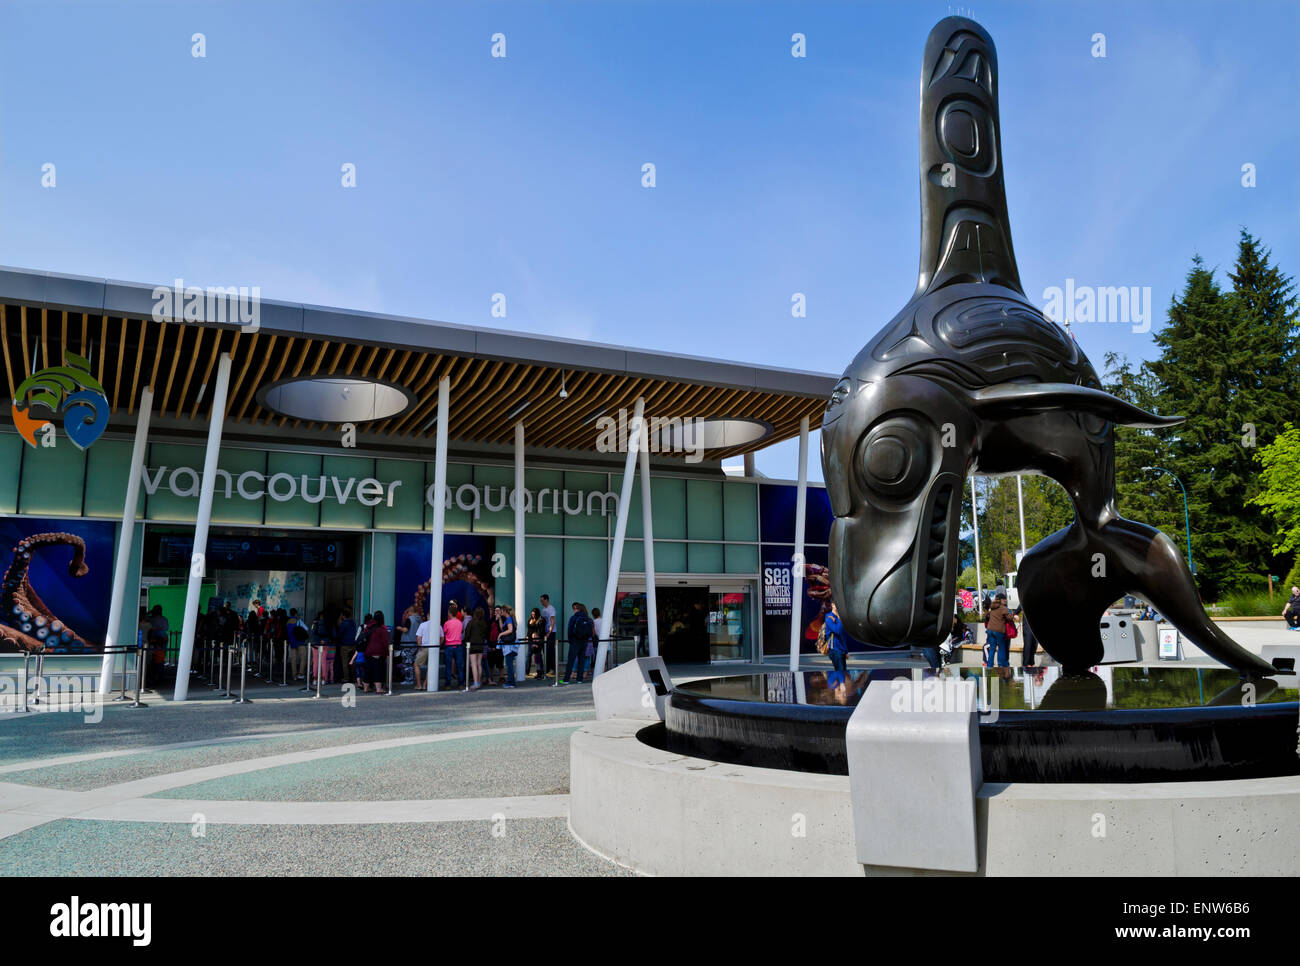 Outside courtyard of the Vancouver Aquarium with sculpture of killer whale (Orca) by first nations (Haida) artist Bill Reid. Stock Photo